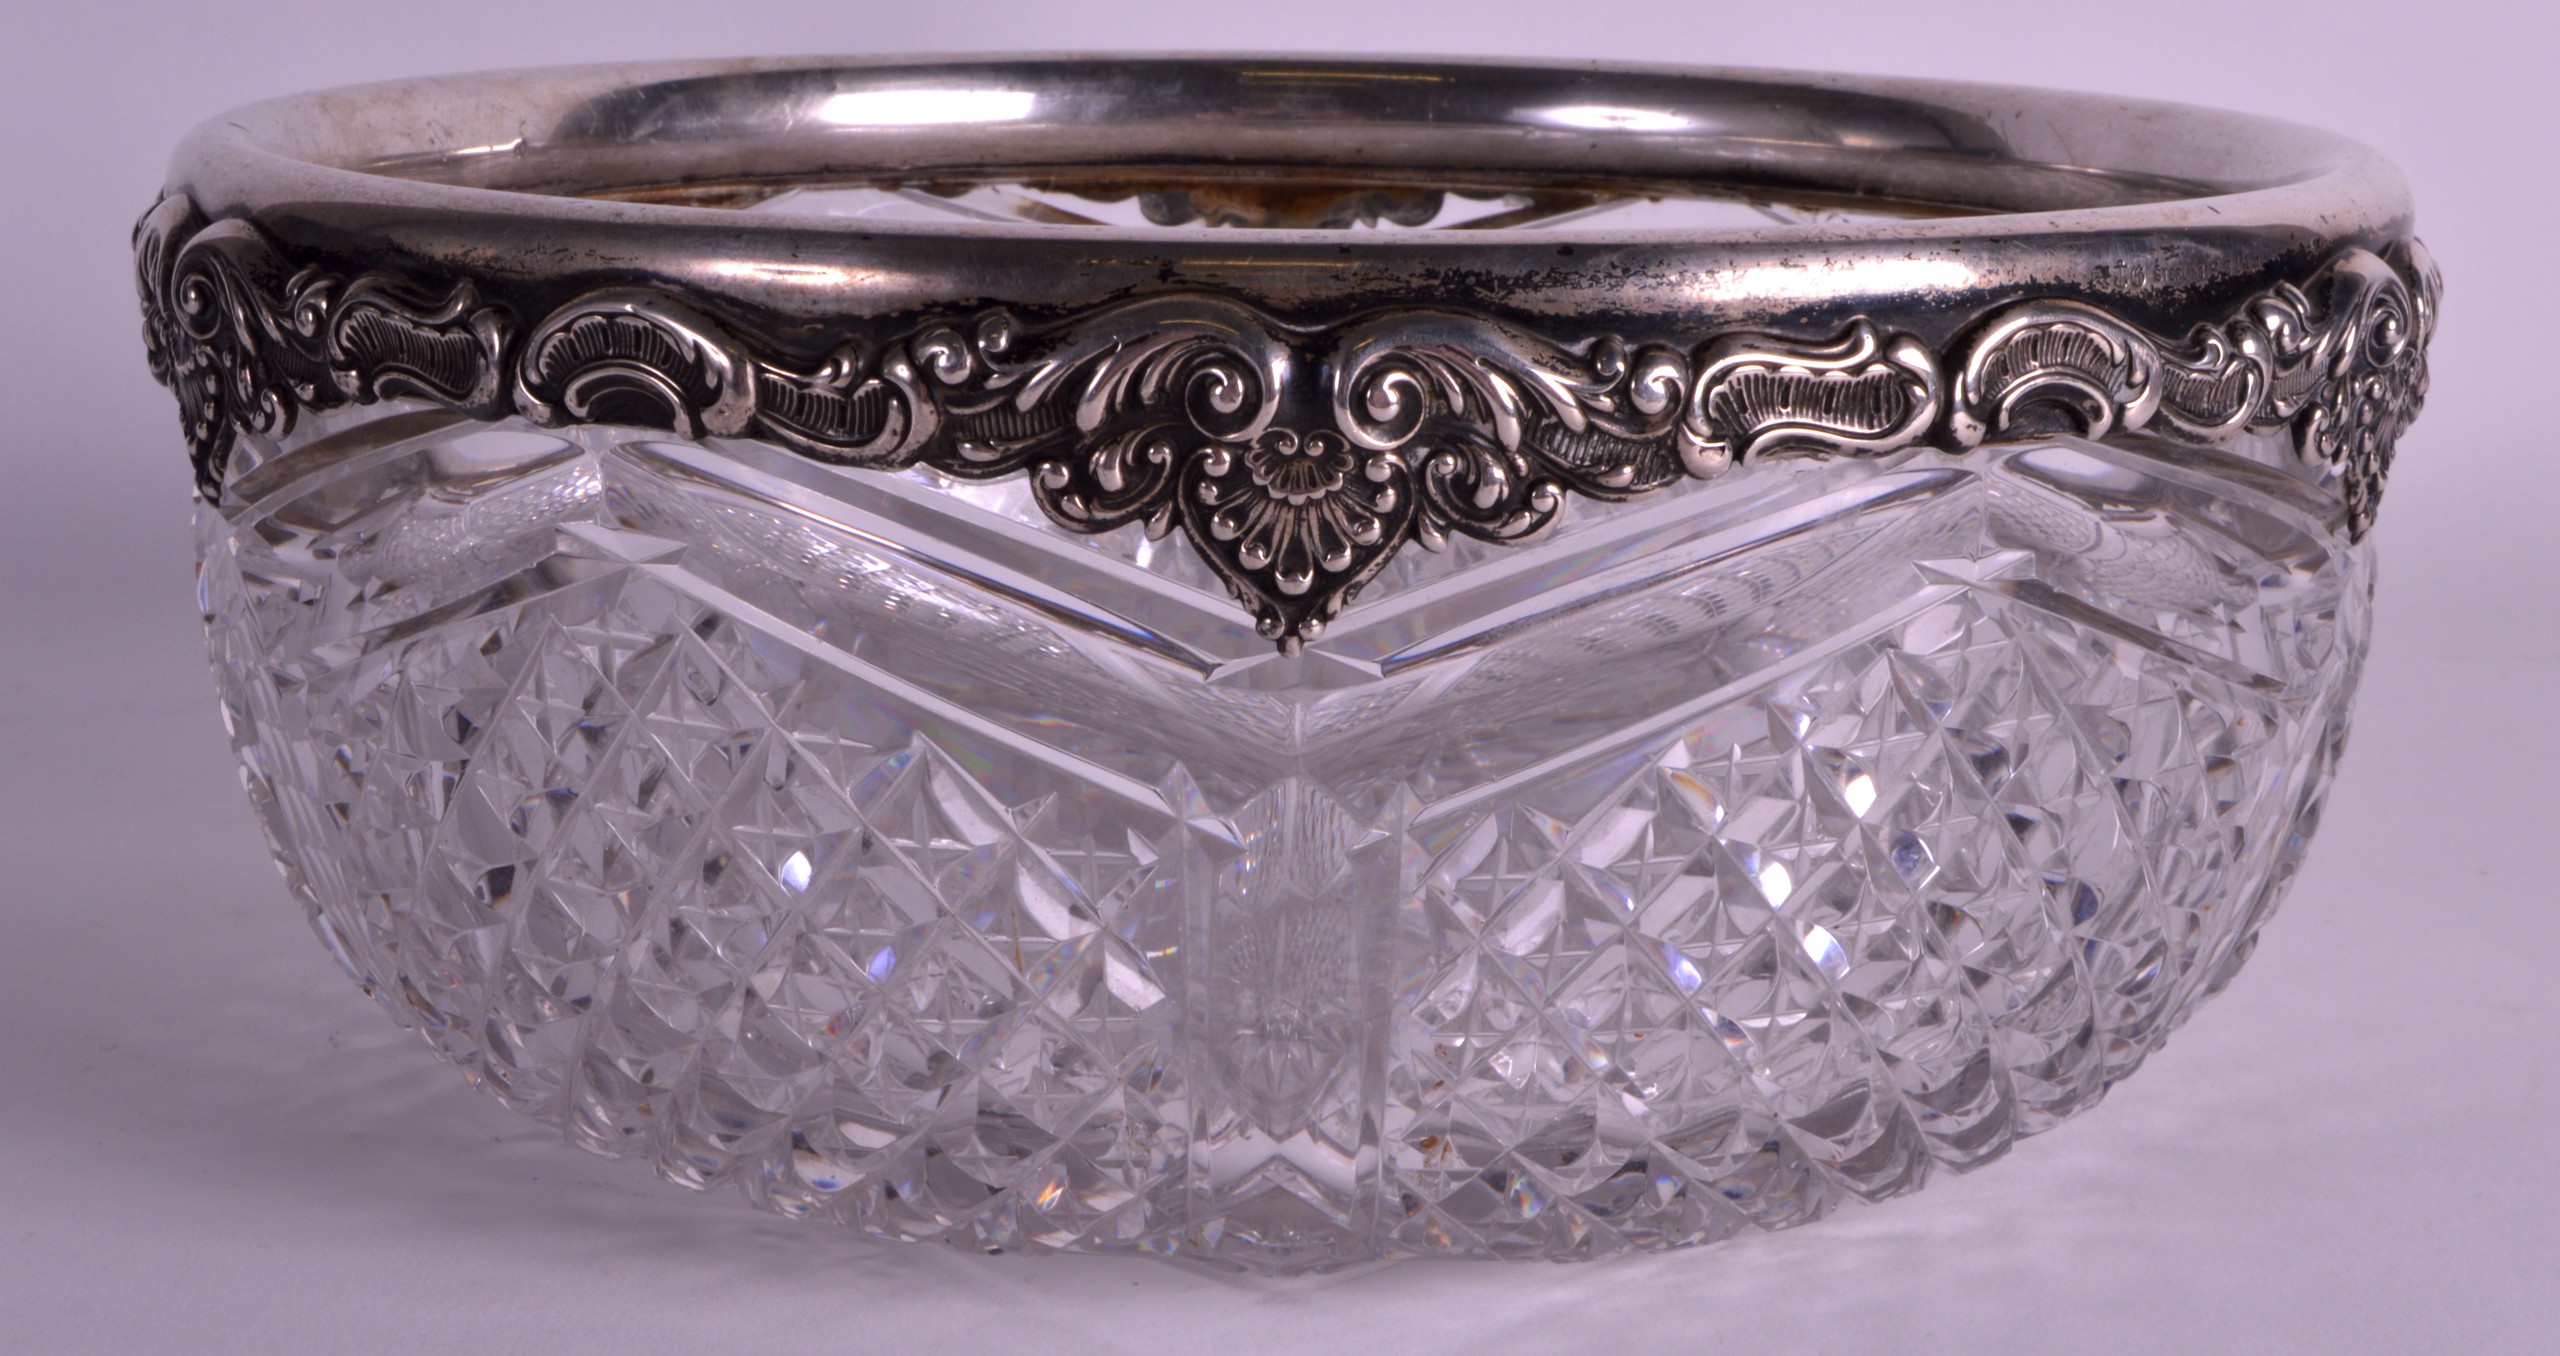 AN EARLY 20TH CENTURY STERLING SILVER MOUNTED CUT GLASS BOWL with acanthus scrolling vine